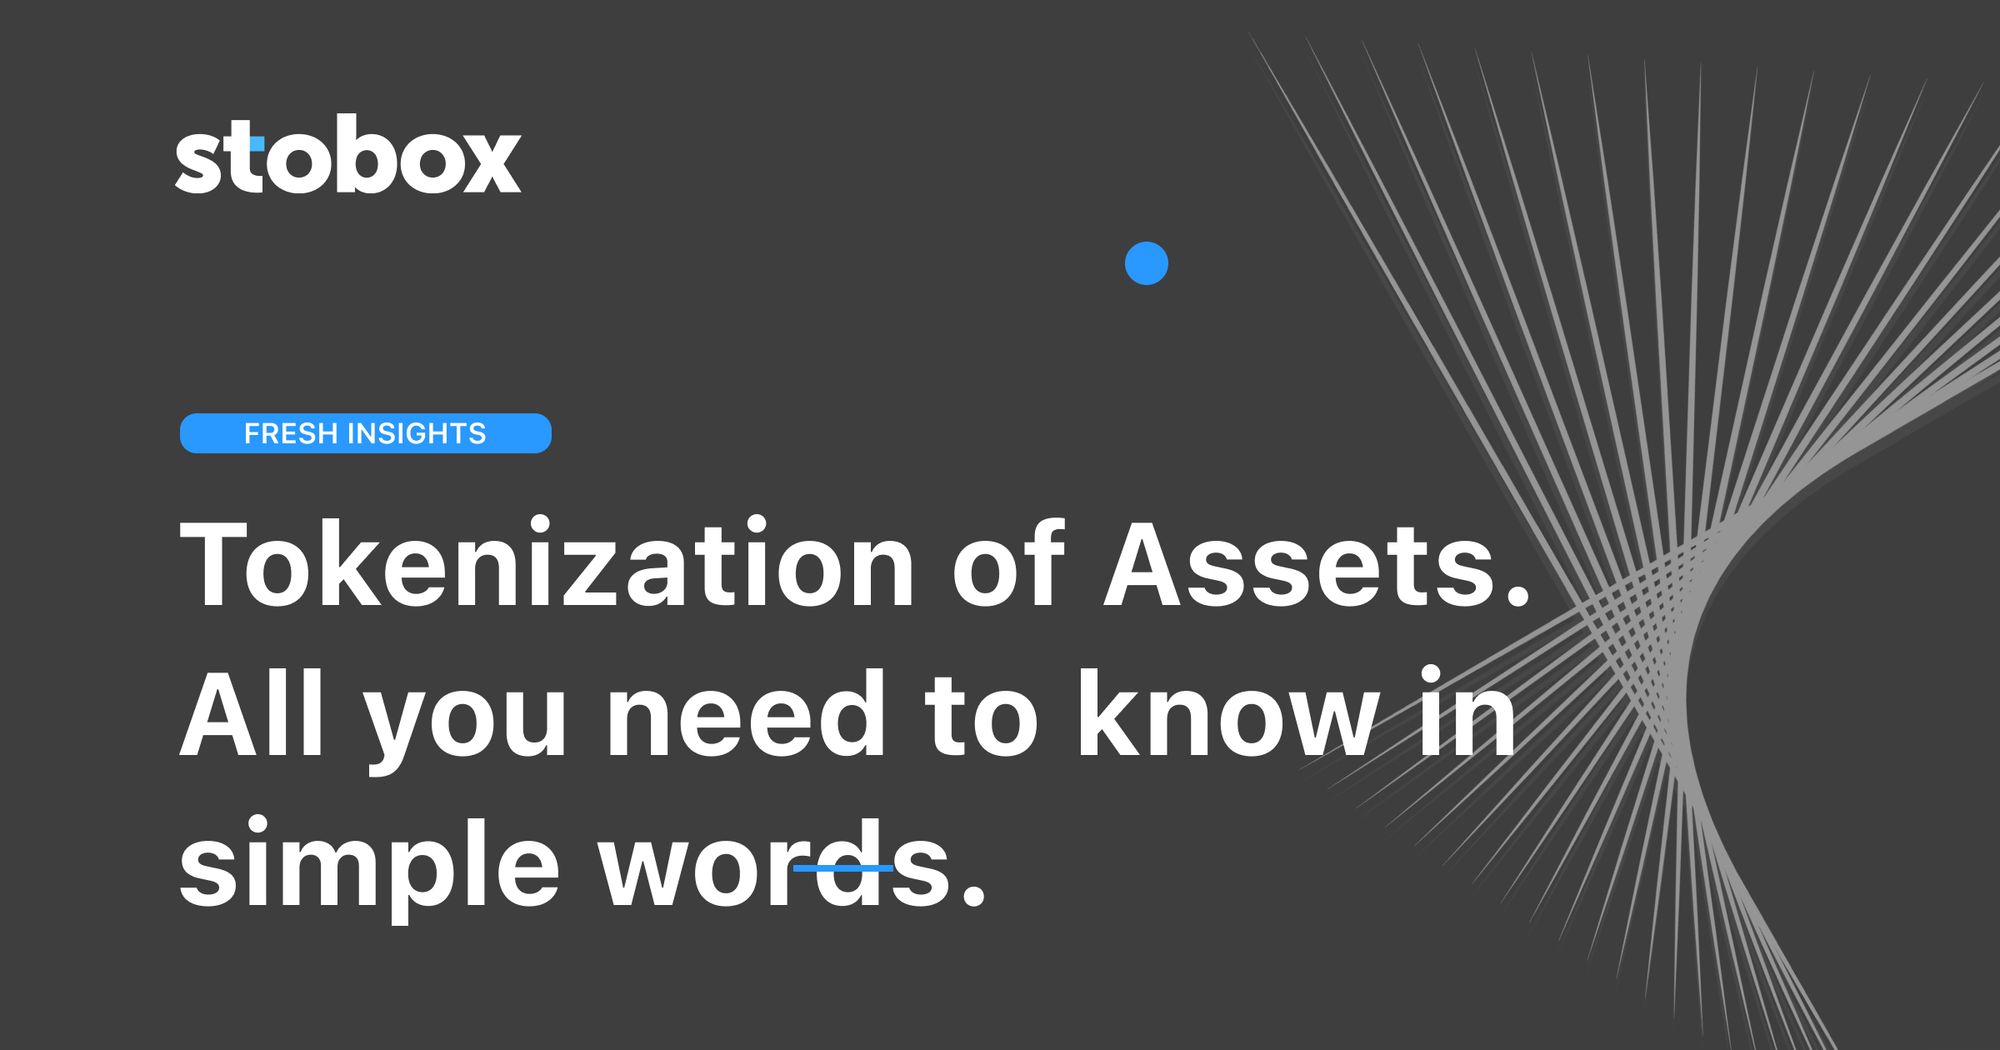 Tokenization of Assets. All you need to know in simple words.